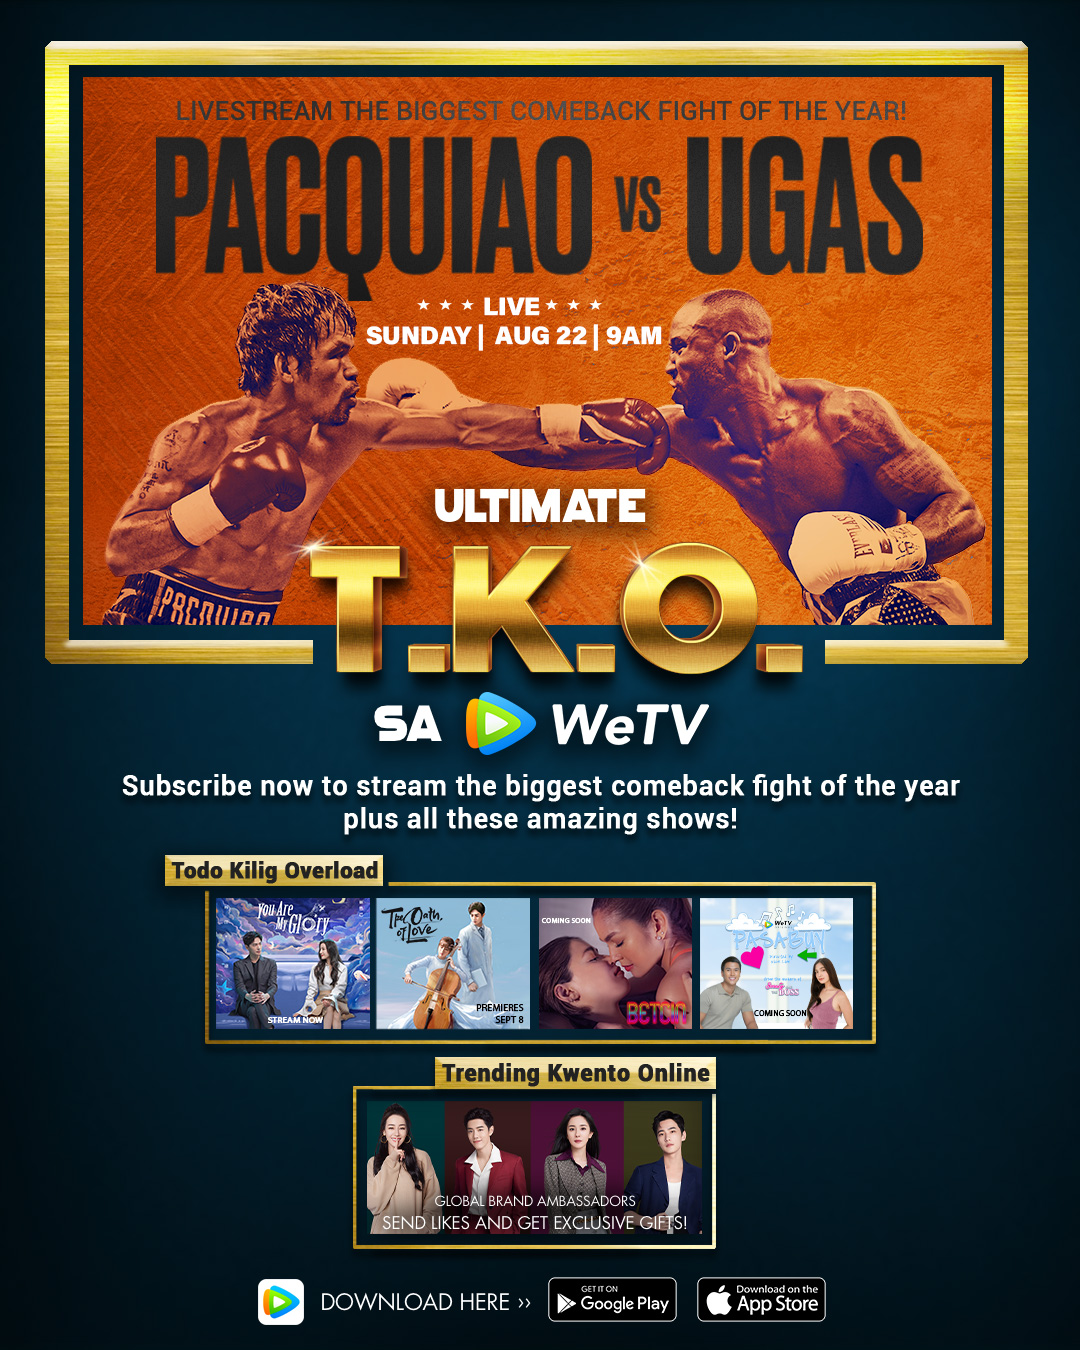 You Can Catch and Livestream the PACQUIAO VS. UGAS Fight on WETV on August 22, 2021